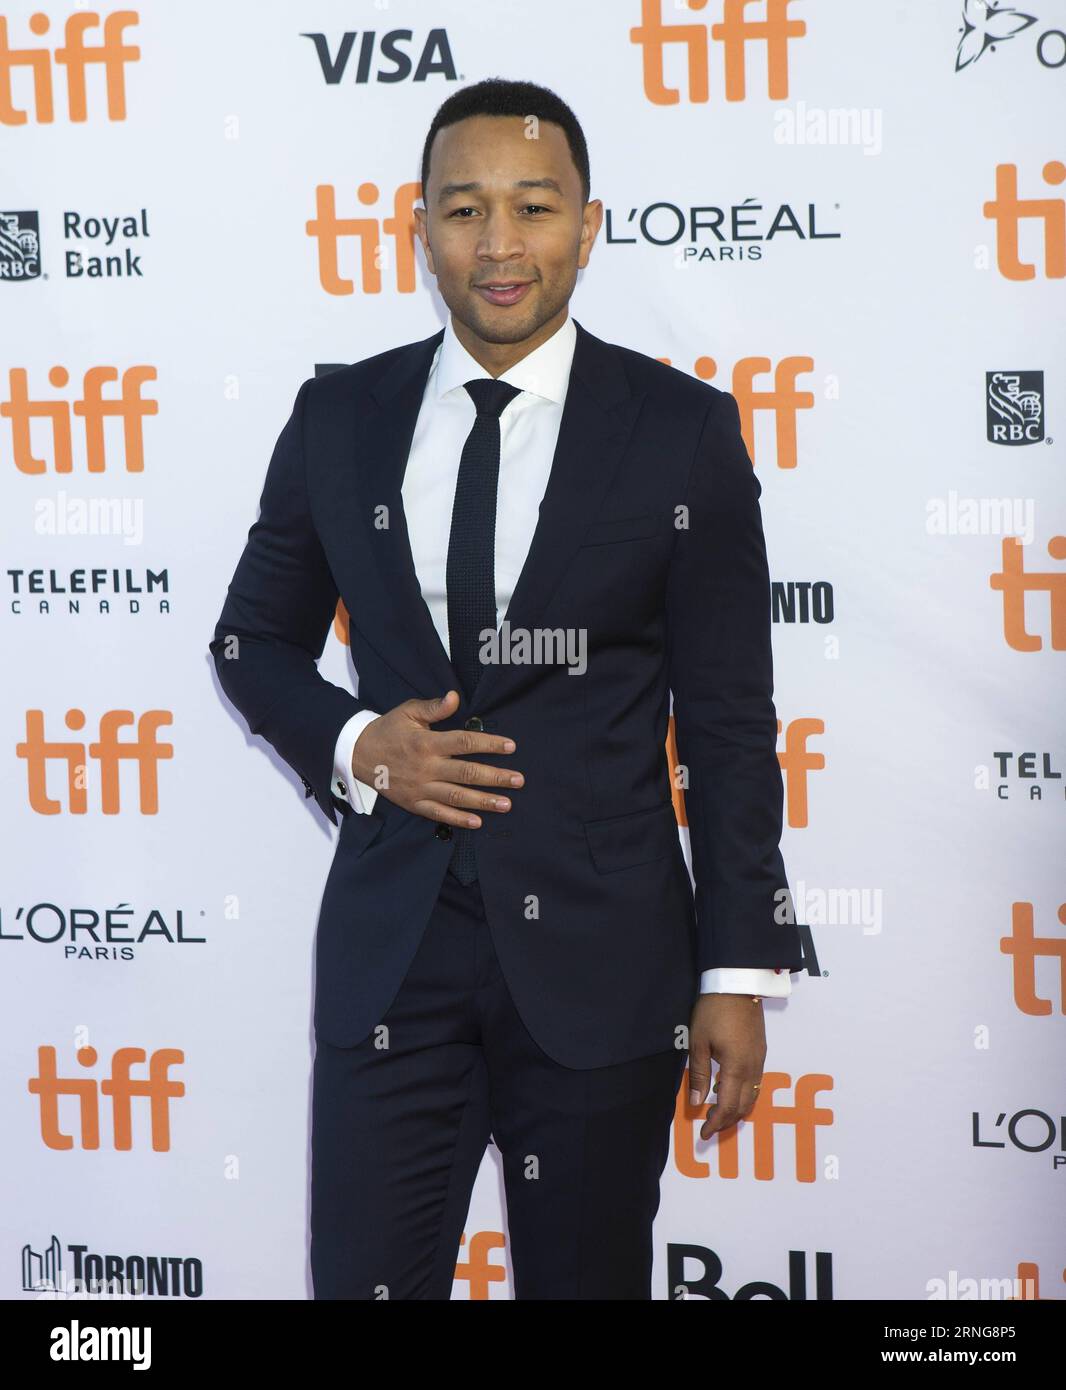 TORONTO, Sept. 12, 2016 -- Actor John Legend poses for photos before the Canadian premiere of the film La La Land at the Princess of Wales Theater during the 41st Toronto International Film Festival in Toronto, Canada, Sept. 12, 2016. ) (zjy) CANADA-TORONTO-FILM FESTIVAL- LA LA LAND ZouxZheng PUBLICATIONxNOTxINxCHN   Toronto Sept 12 2016 Actor John Legend Poses for Photos Before The Canadian Premiere of The Film La La Country AT The Princess of Wales Theatre during The 41st Toronto International Film Festival in Toronto Canada Sept 12 2016 zjy Canada Toronto Film Festival La La Country ZouxZhe Stock Photo